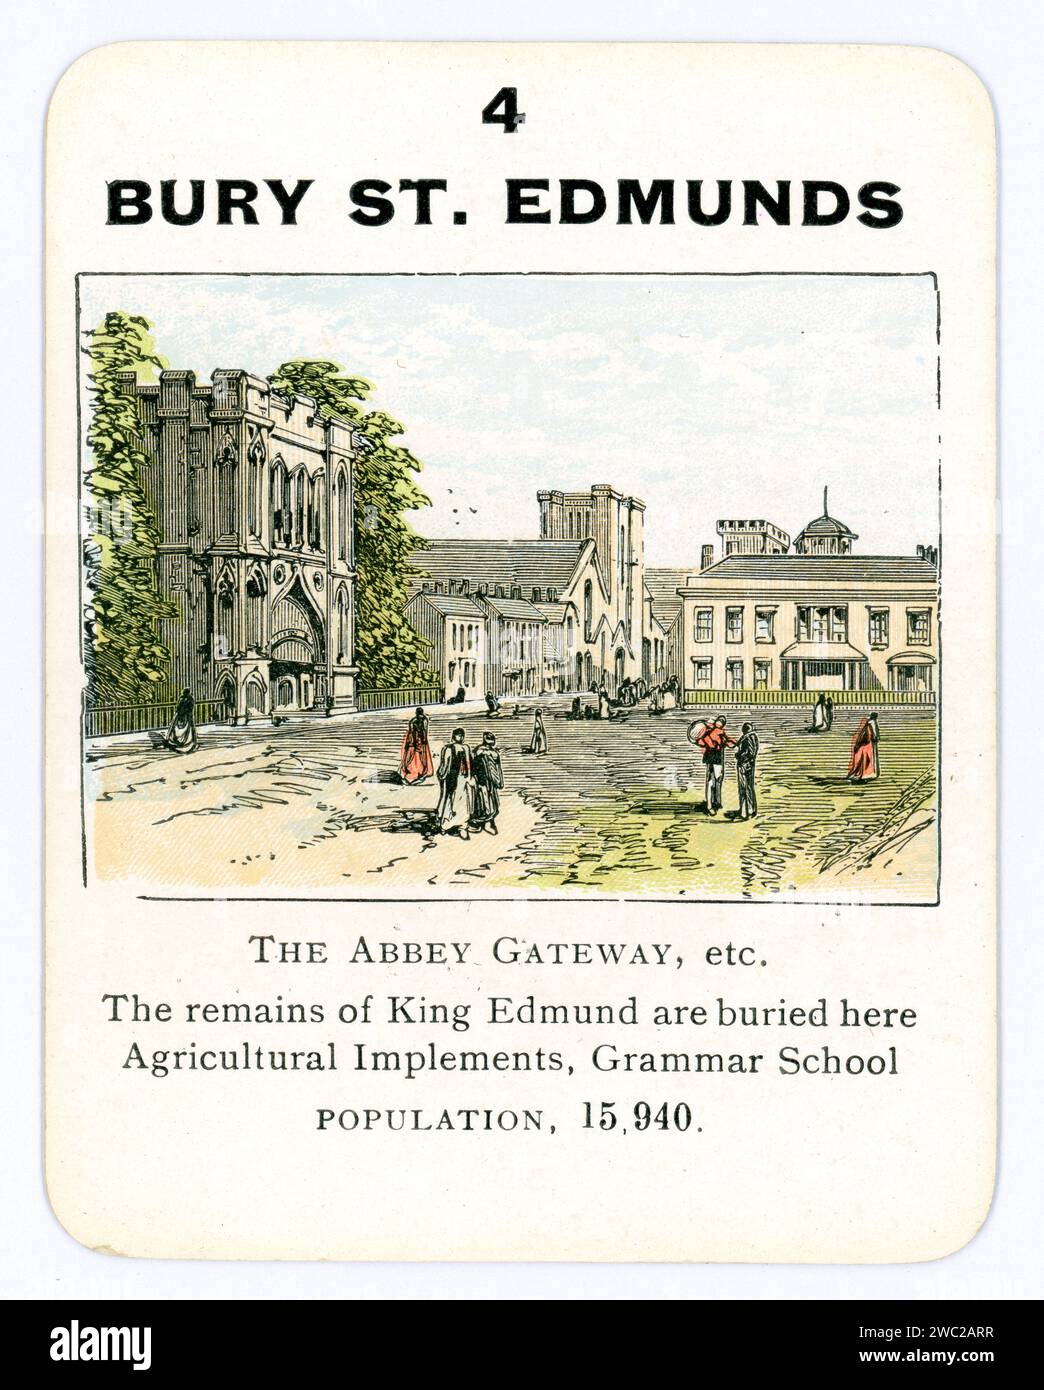 Early 1900's playing card, colour illustration of Bury St. Edmunds town, Suffolk, England, U.K. Circa 1910's / 1920's . Stock Photo